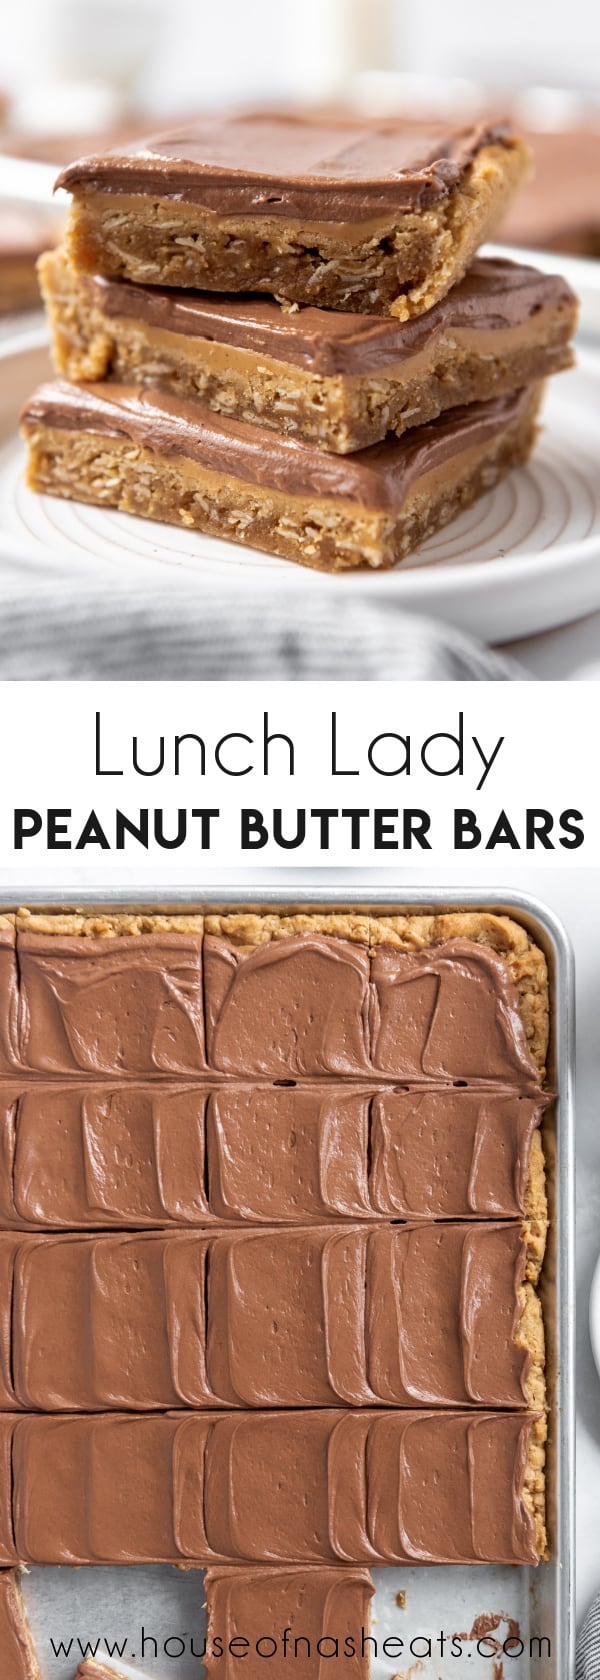 A collage of images of lunch lady peanut butter bars with text overlay.